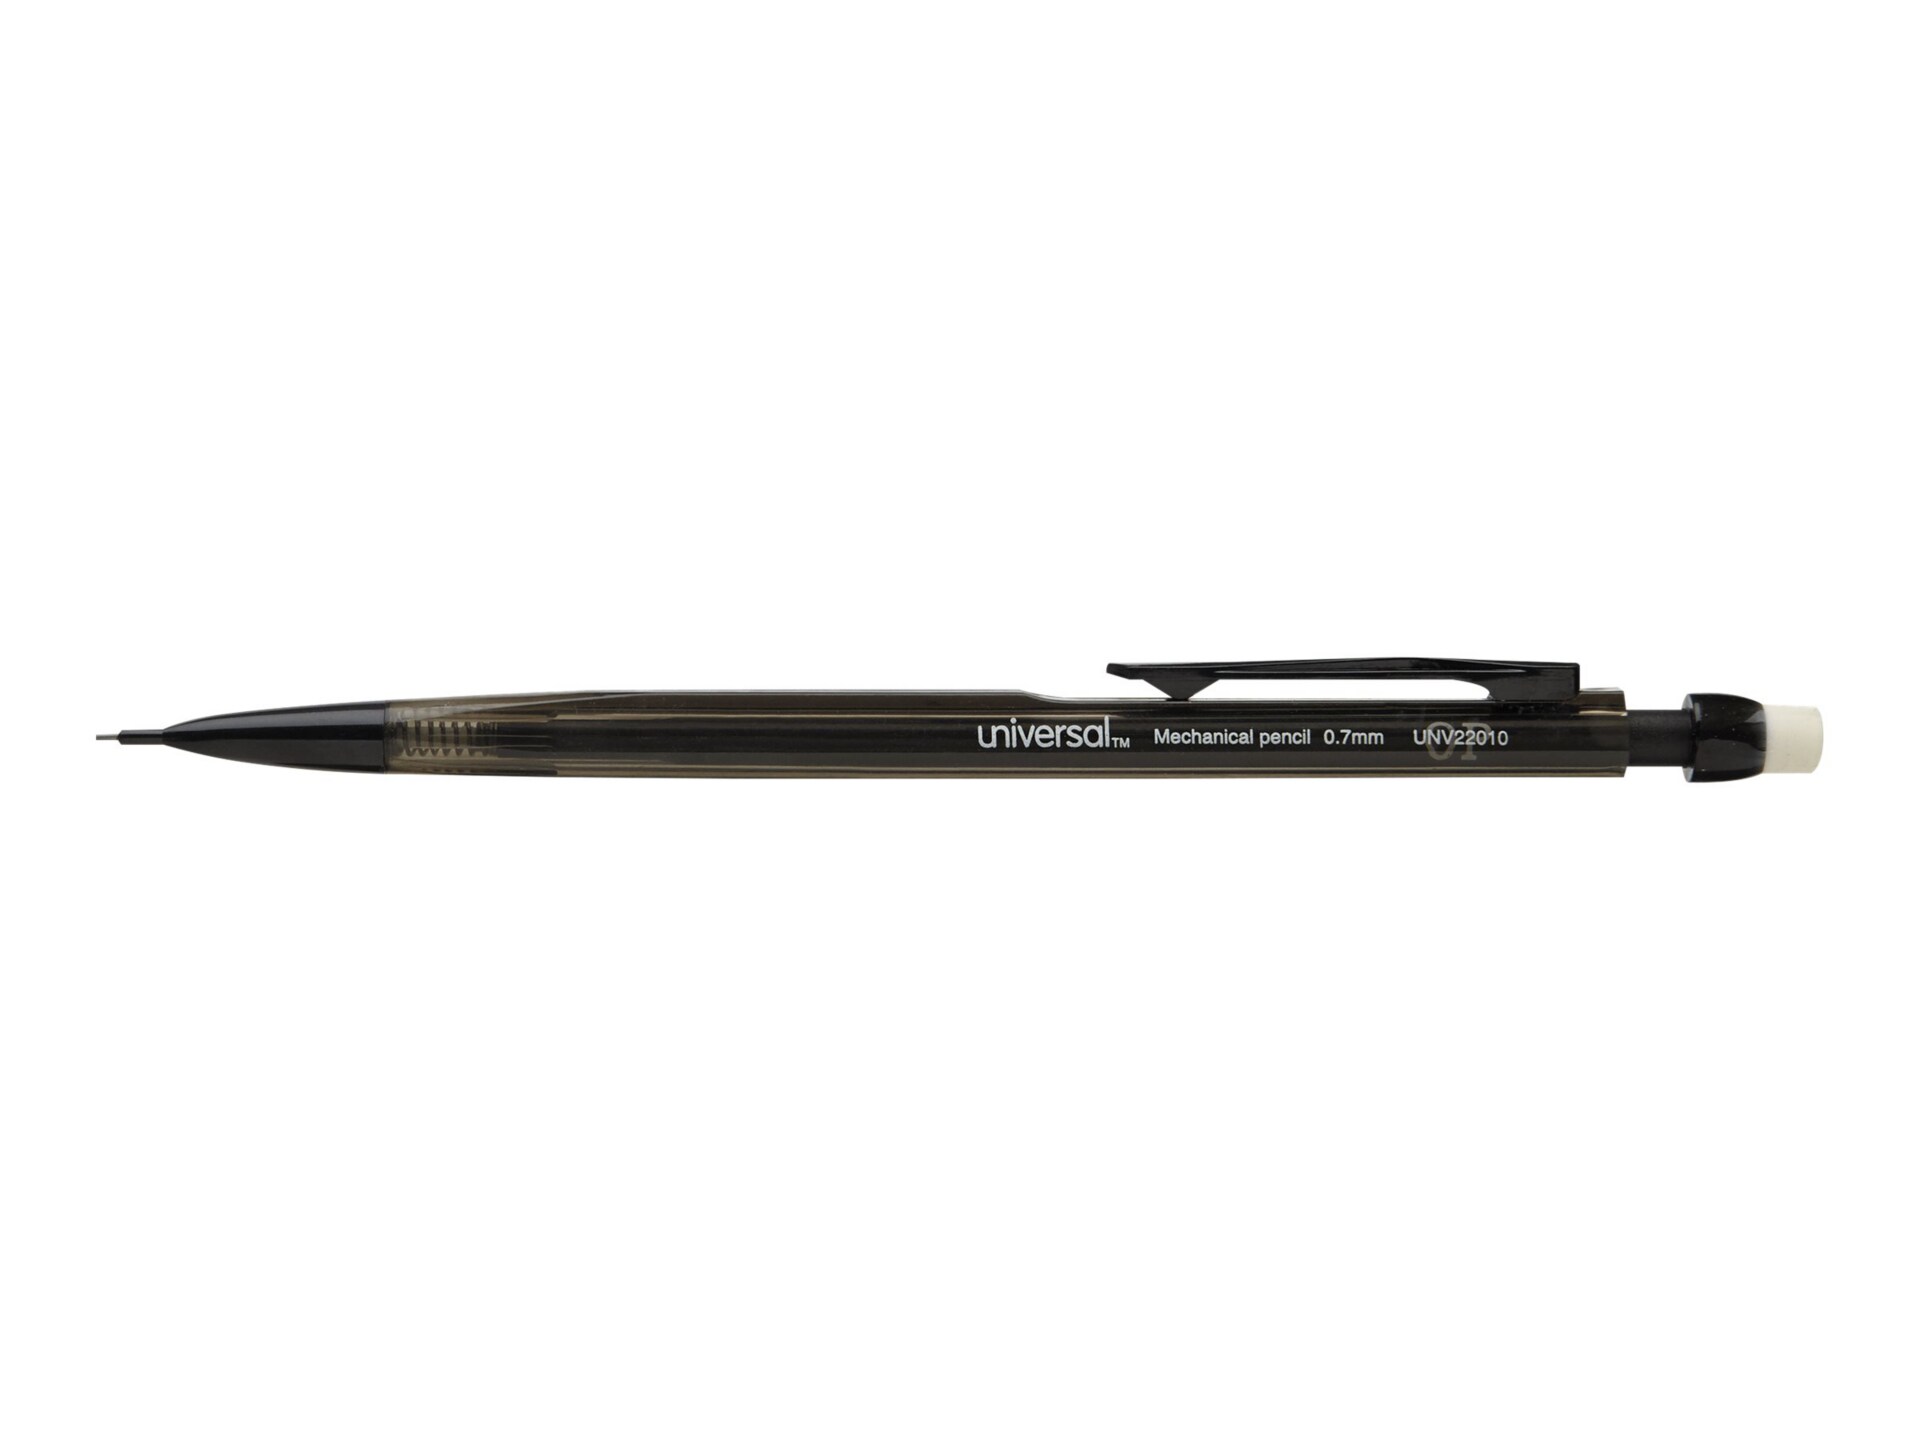 Universal - mechanical pencil (pack of 12)